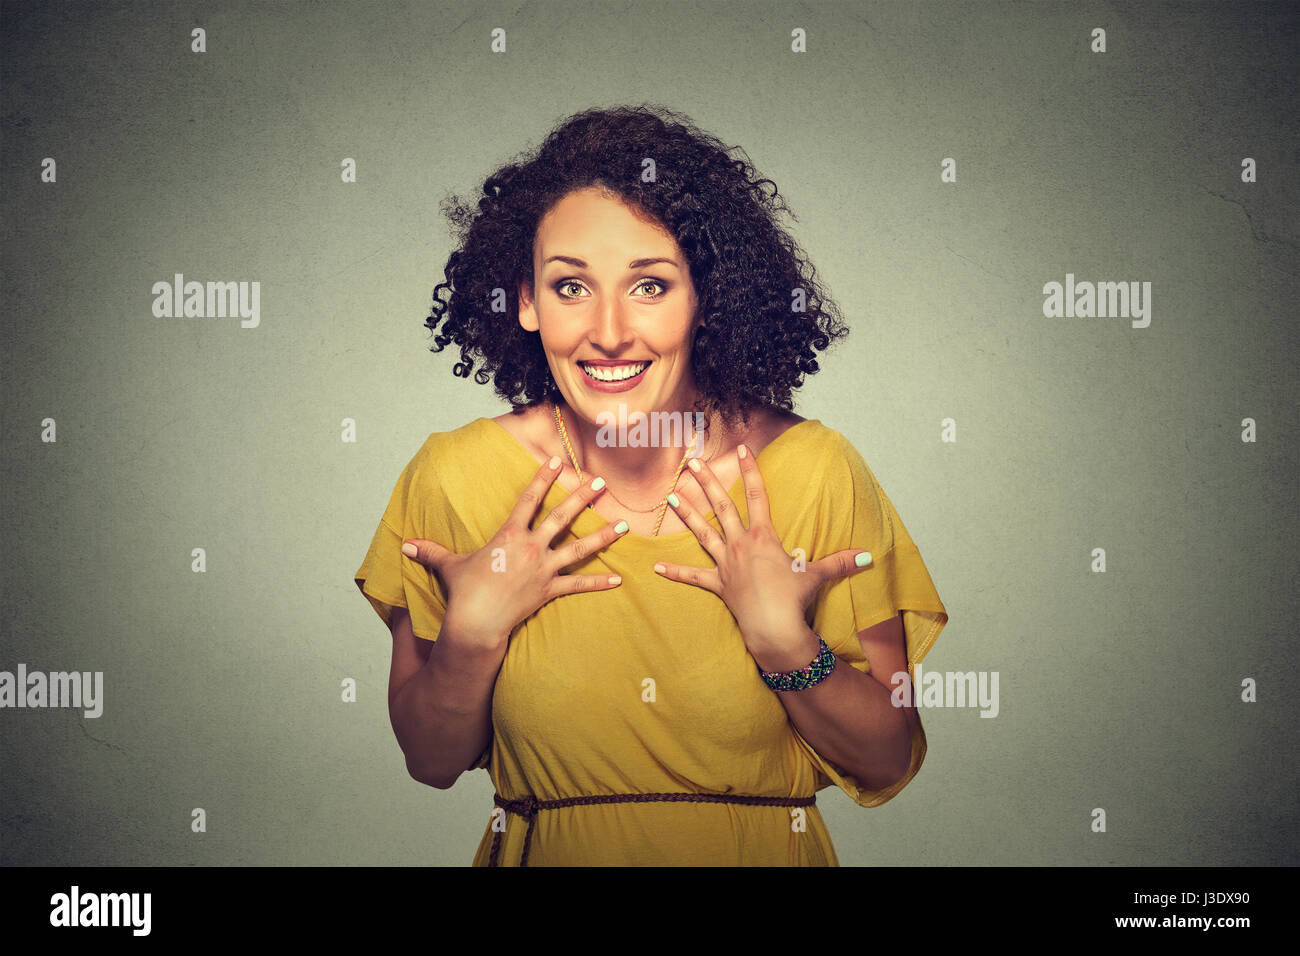 Closeup portrait of happy cute young woman looking excited, surprised in full disbelief, hands on chest, it's me? isolated on gray background. Positiv Stock Photo